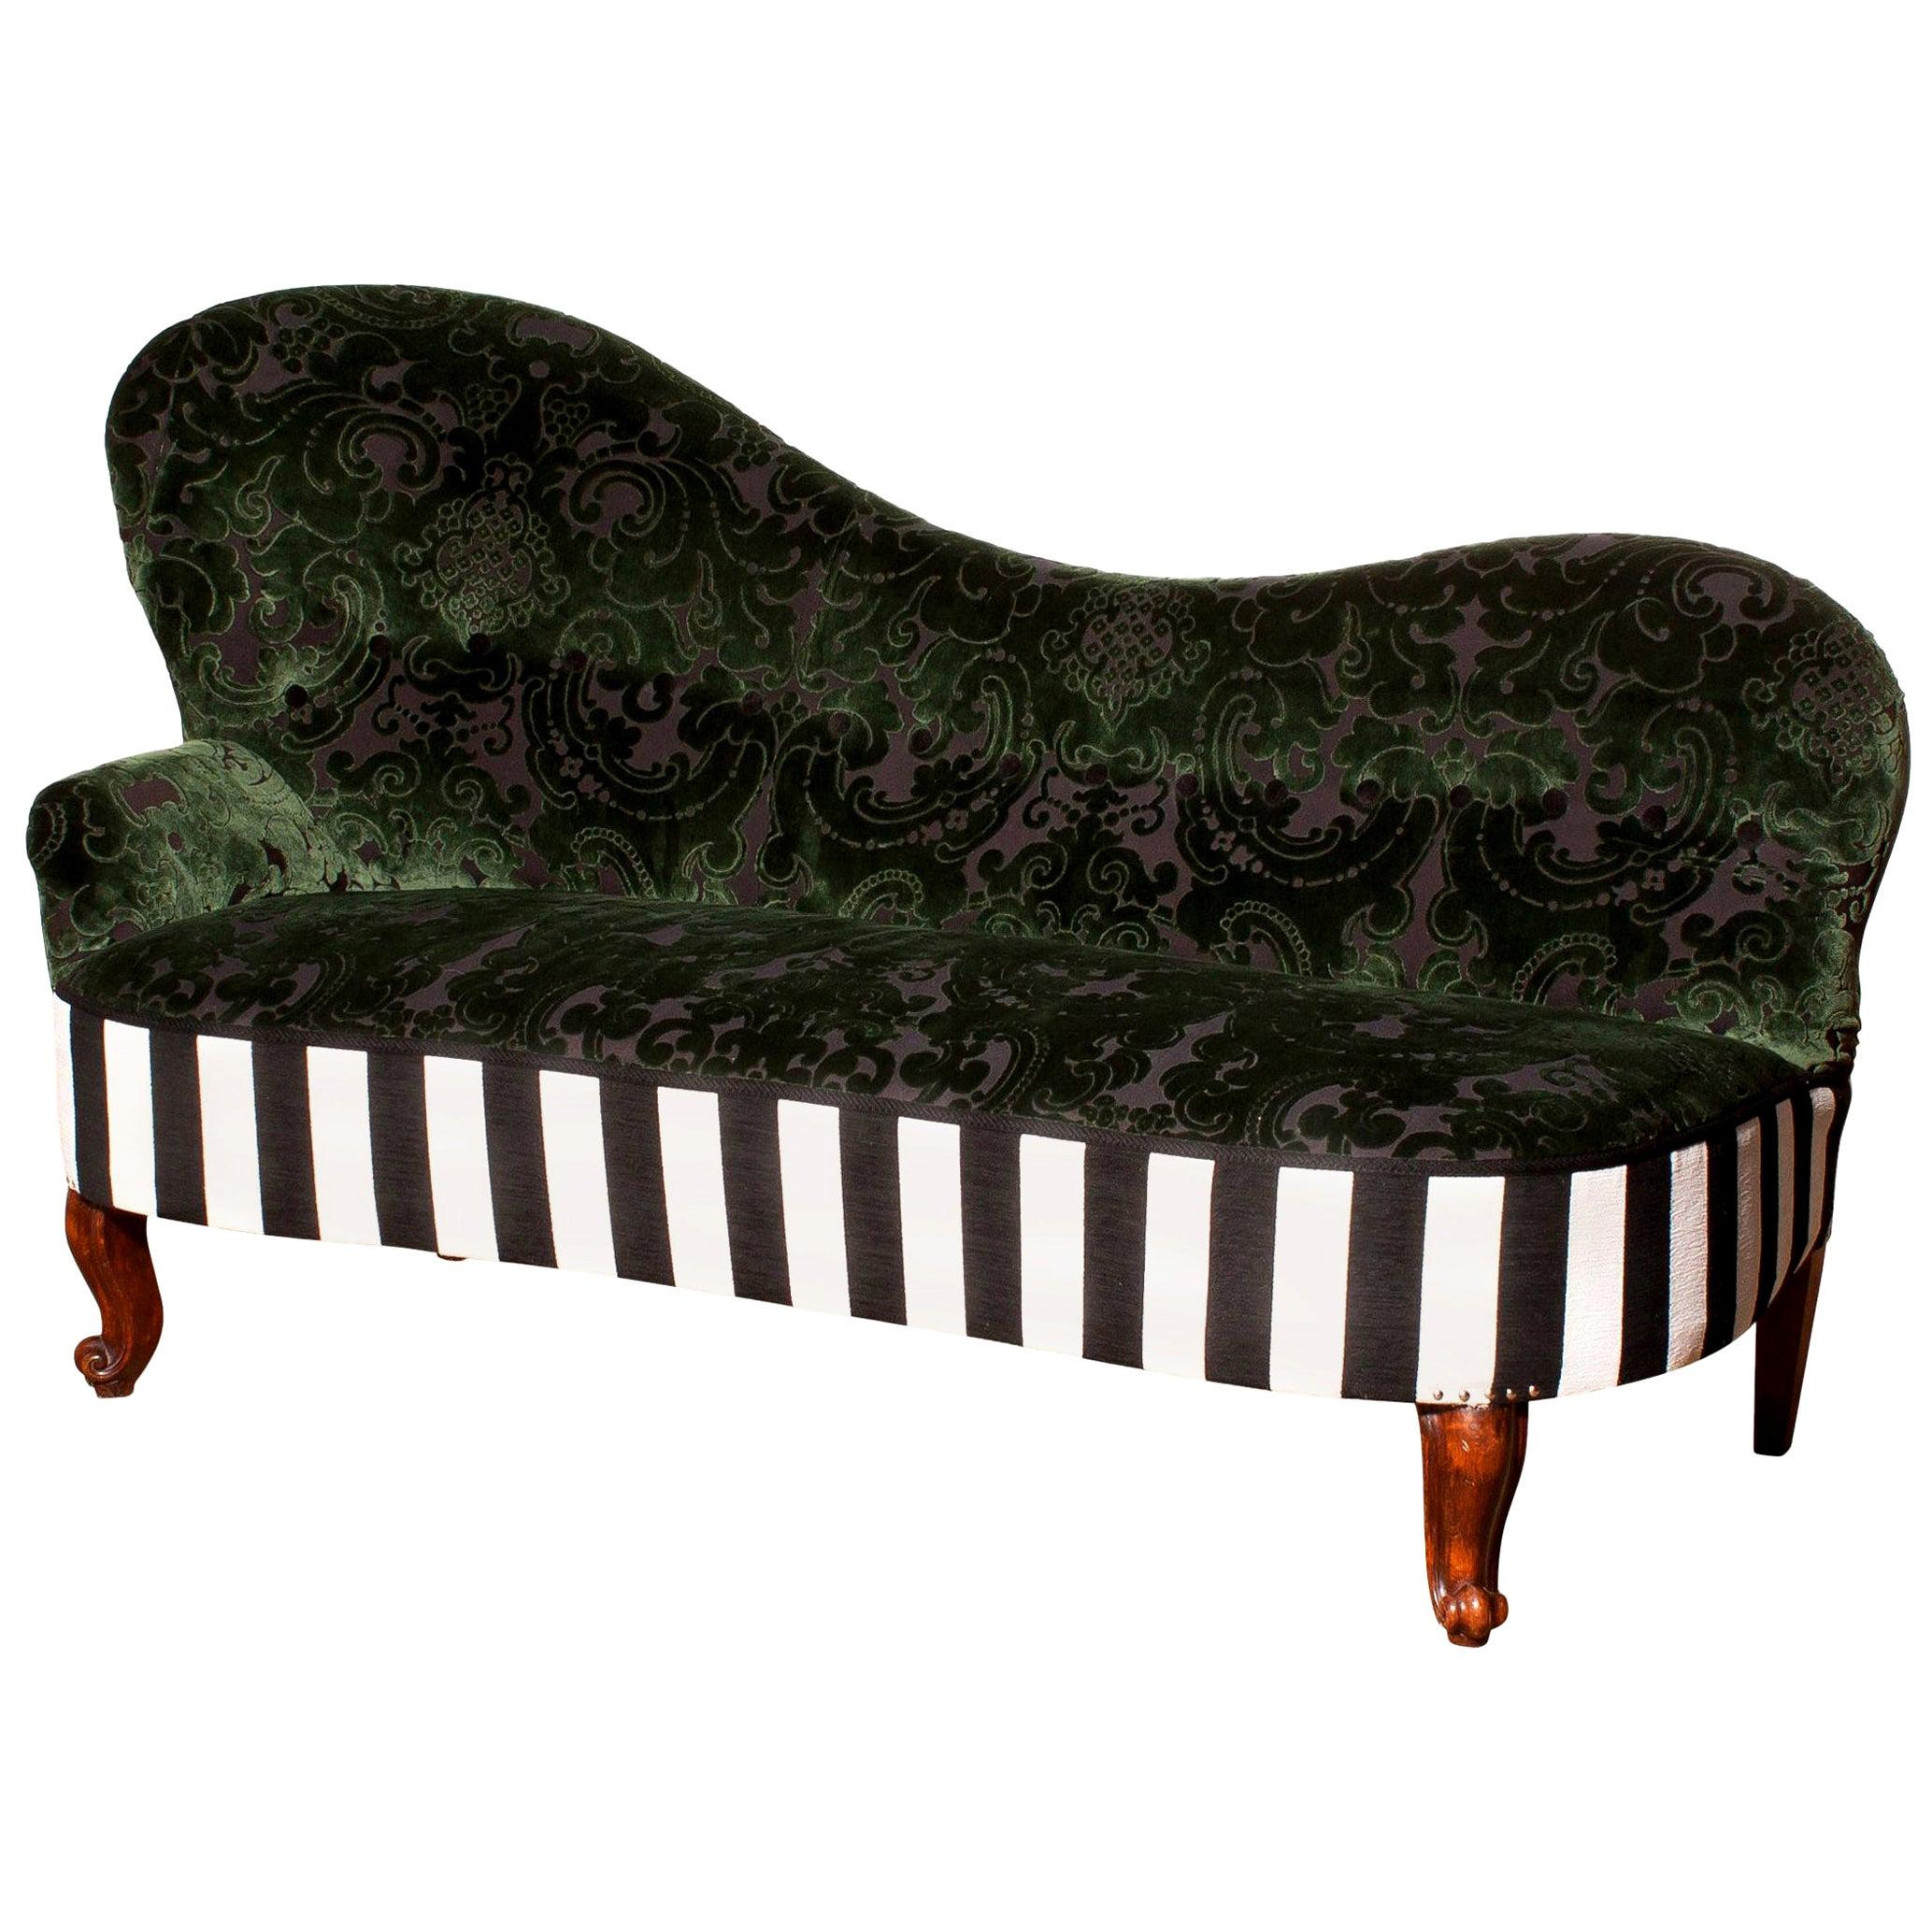 A very beautiful sofa or daybed.
This chaise lounge is reupholstered with green jacquard velvet and a black and white stripe chenille fabric.
It is in wonderful condition.
Period 1950s
Dimensions: H 100 cm x W 170 cm x D 75 cm x SH 44 cm.